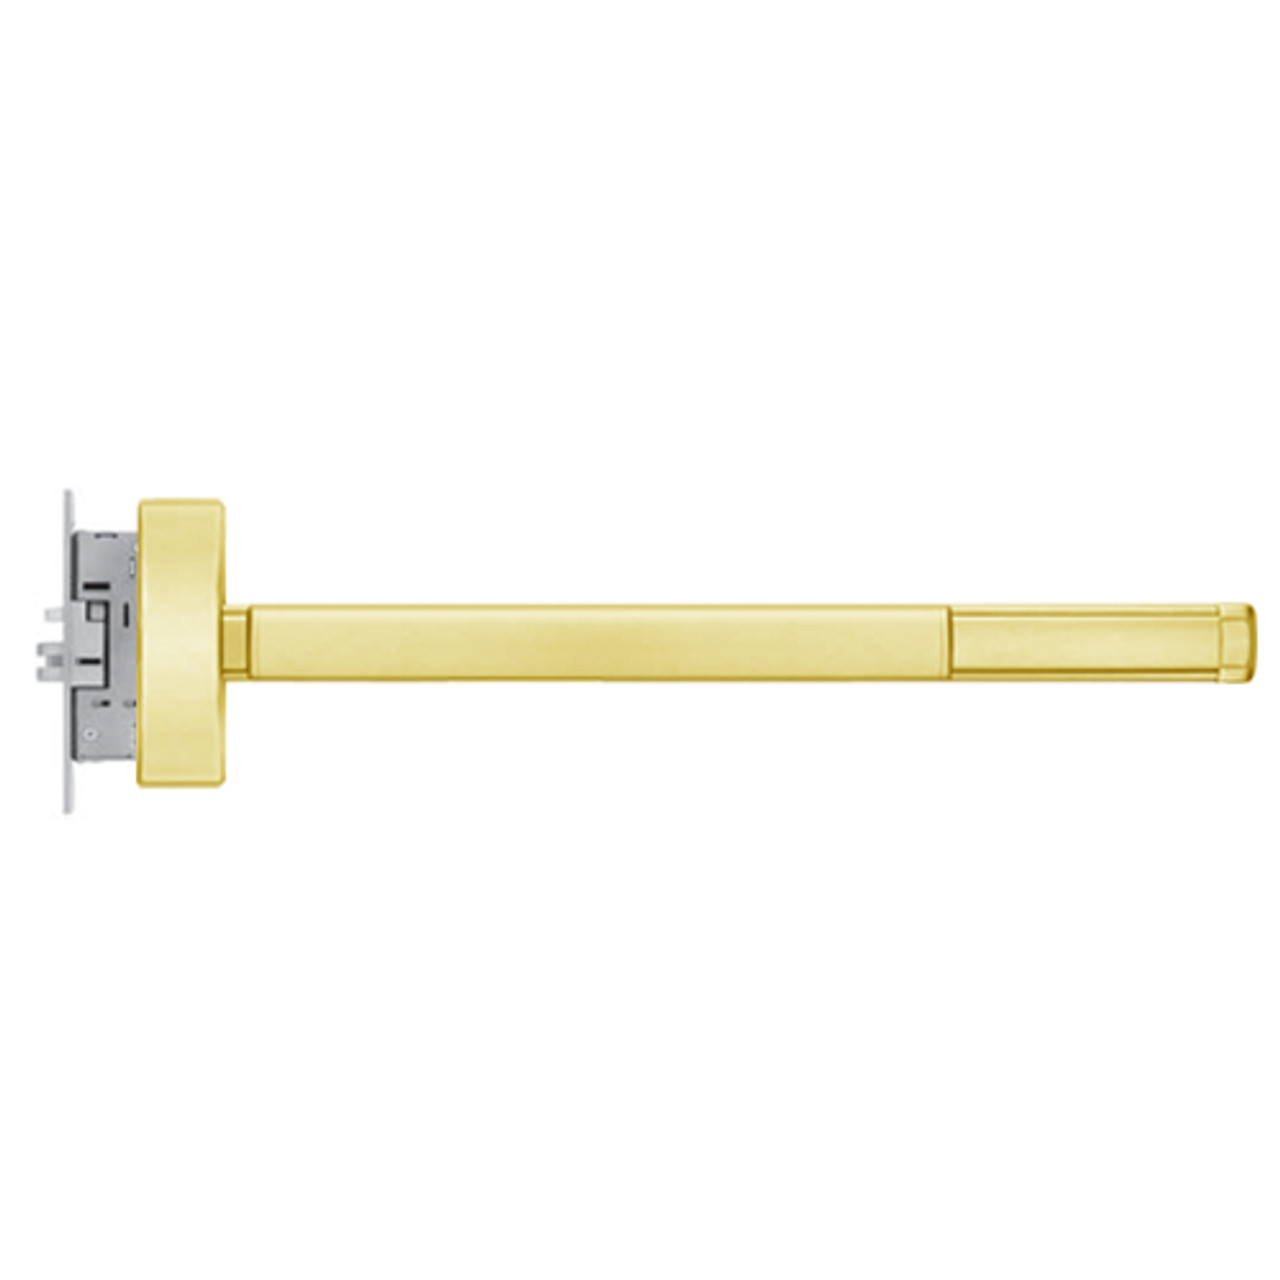 MLR2305-LHR-605-36 PHI 2300 Series Apex Mortise Exit Device with Motorized Latch Retraction Prepped for Key Controls Thumb Piece in Bright Brass Finish